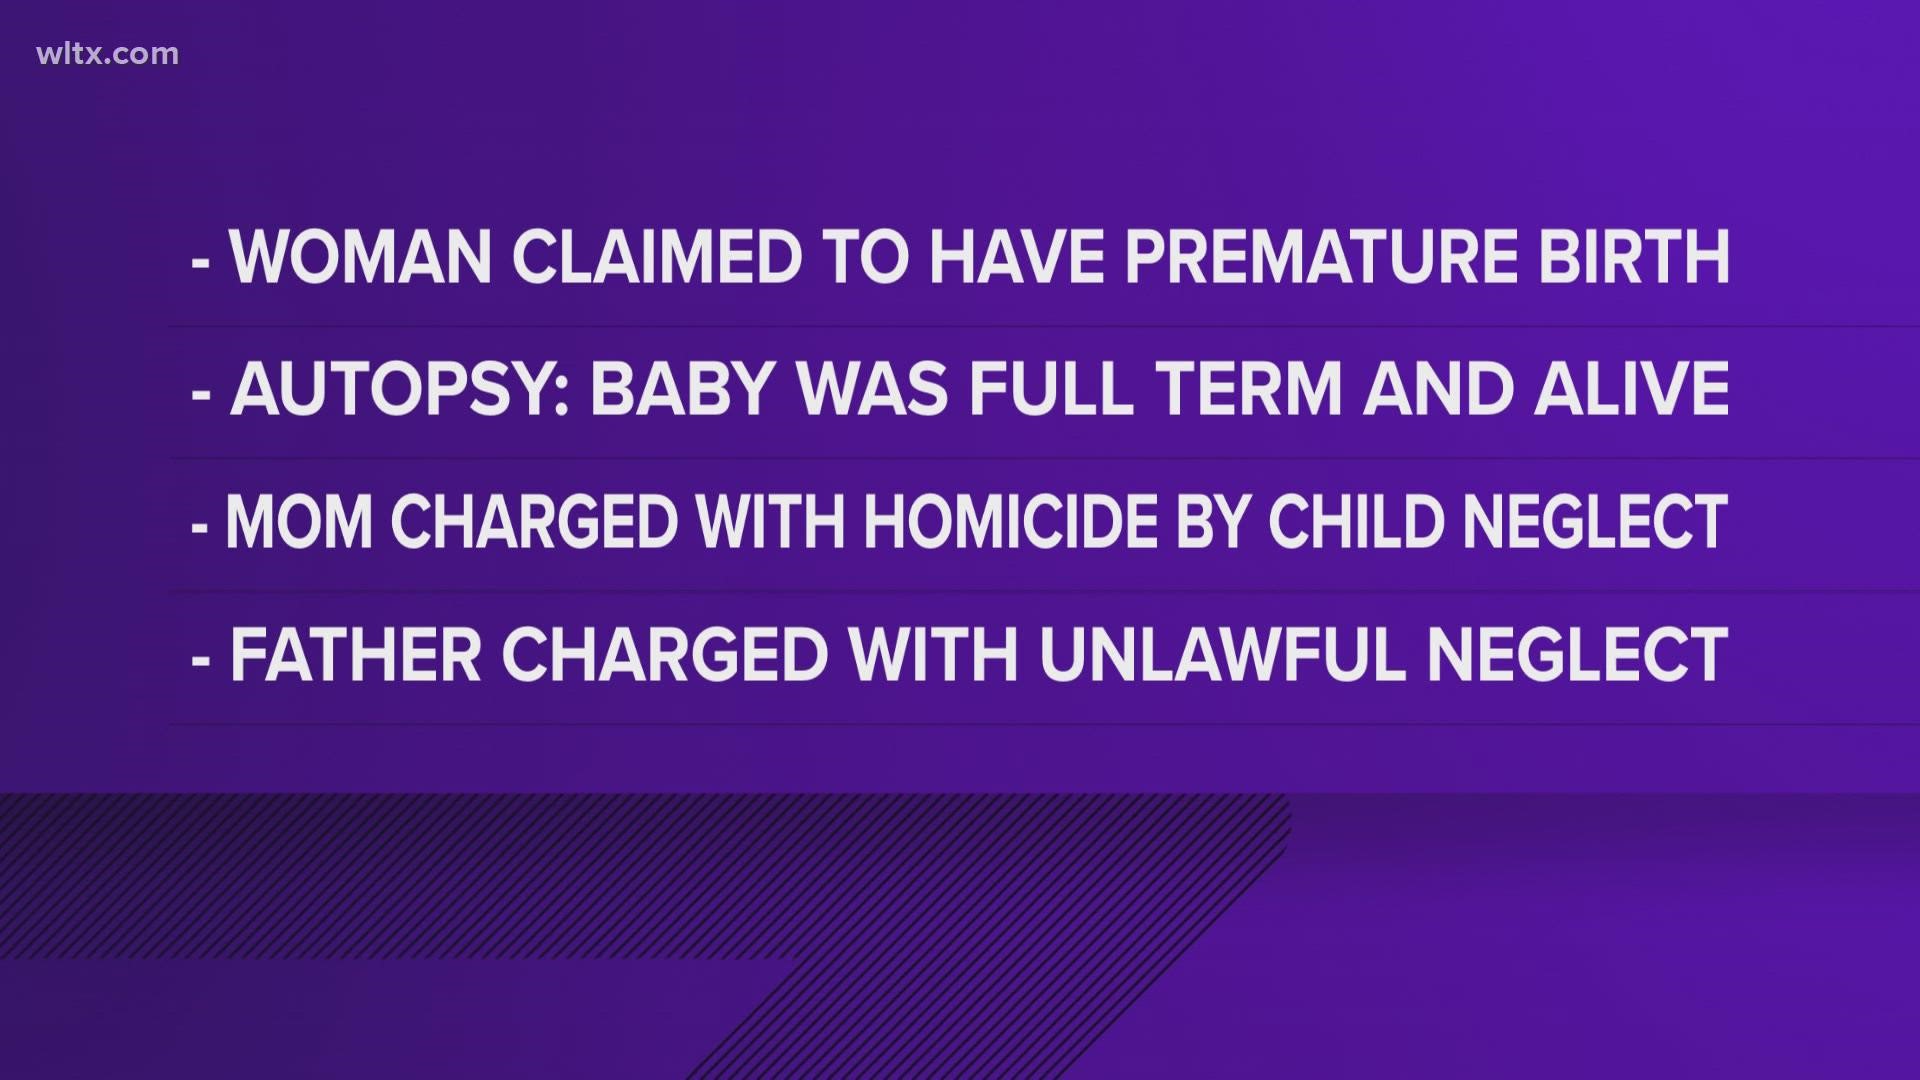 The mother and father are charged in connection with the death of a newborn child in Sumter.